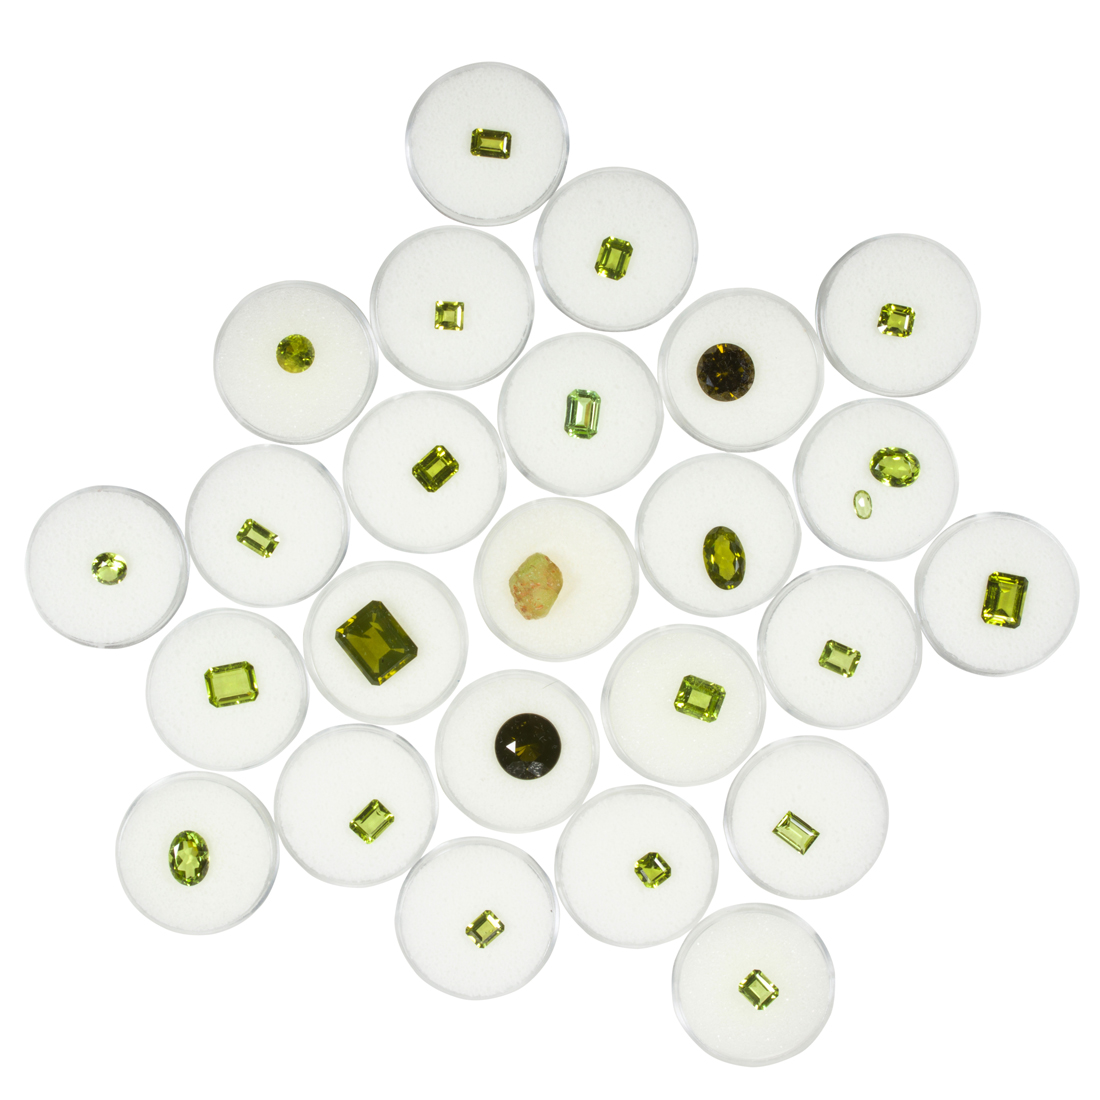 A GROUP OF UNMOUNTED PERIDOTS A 3cdedd